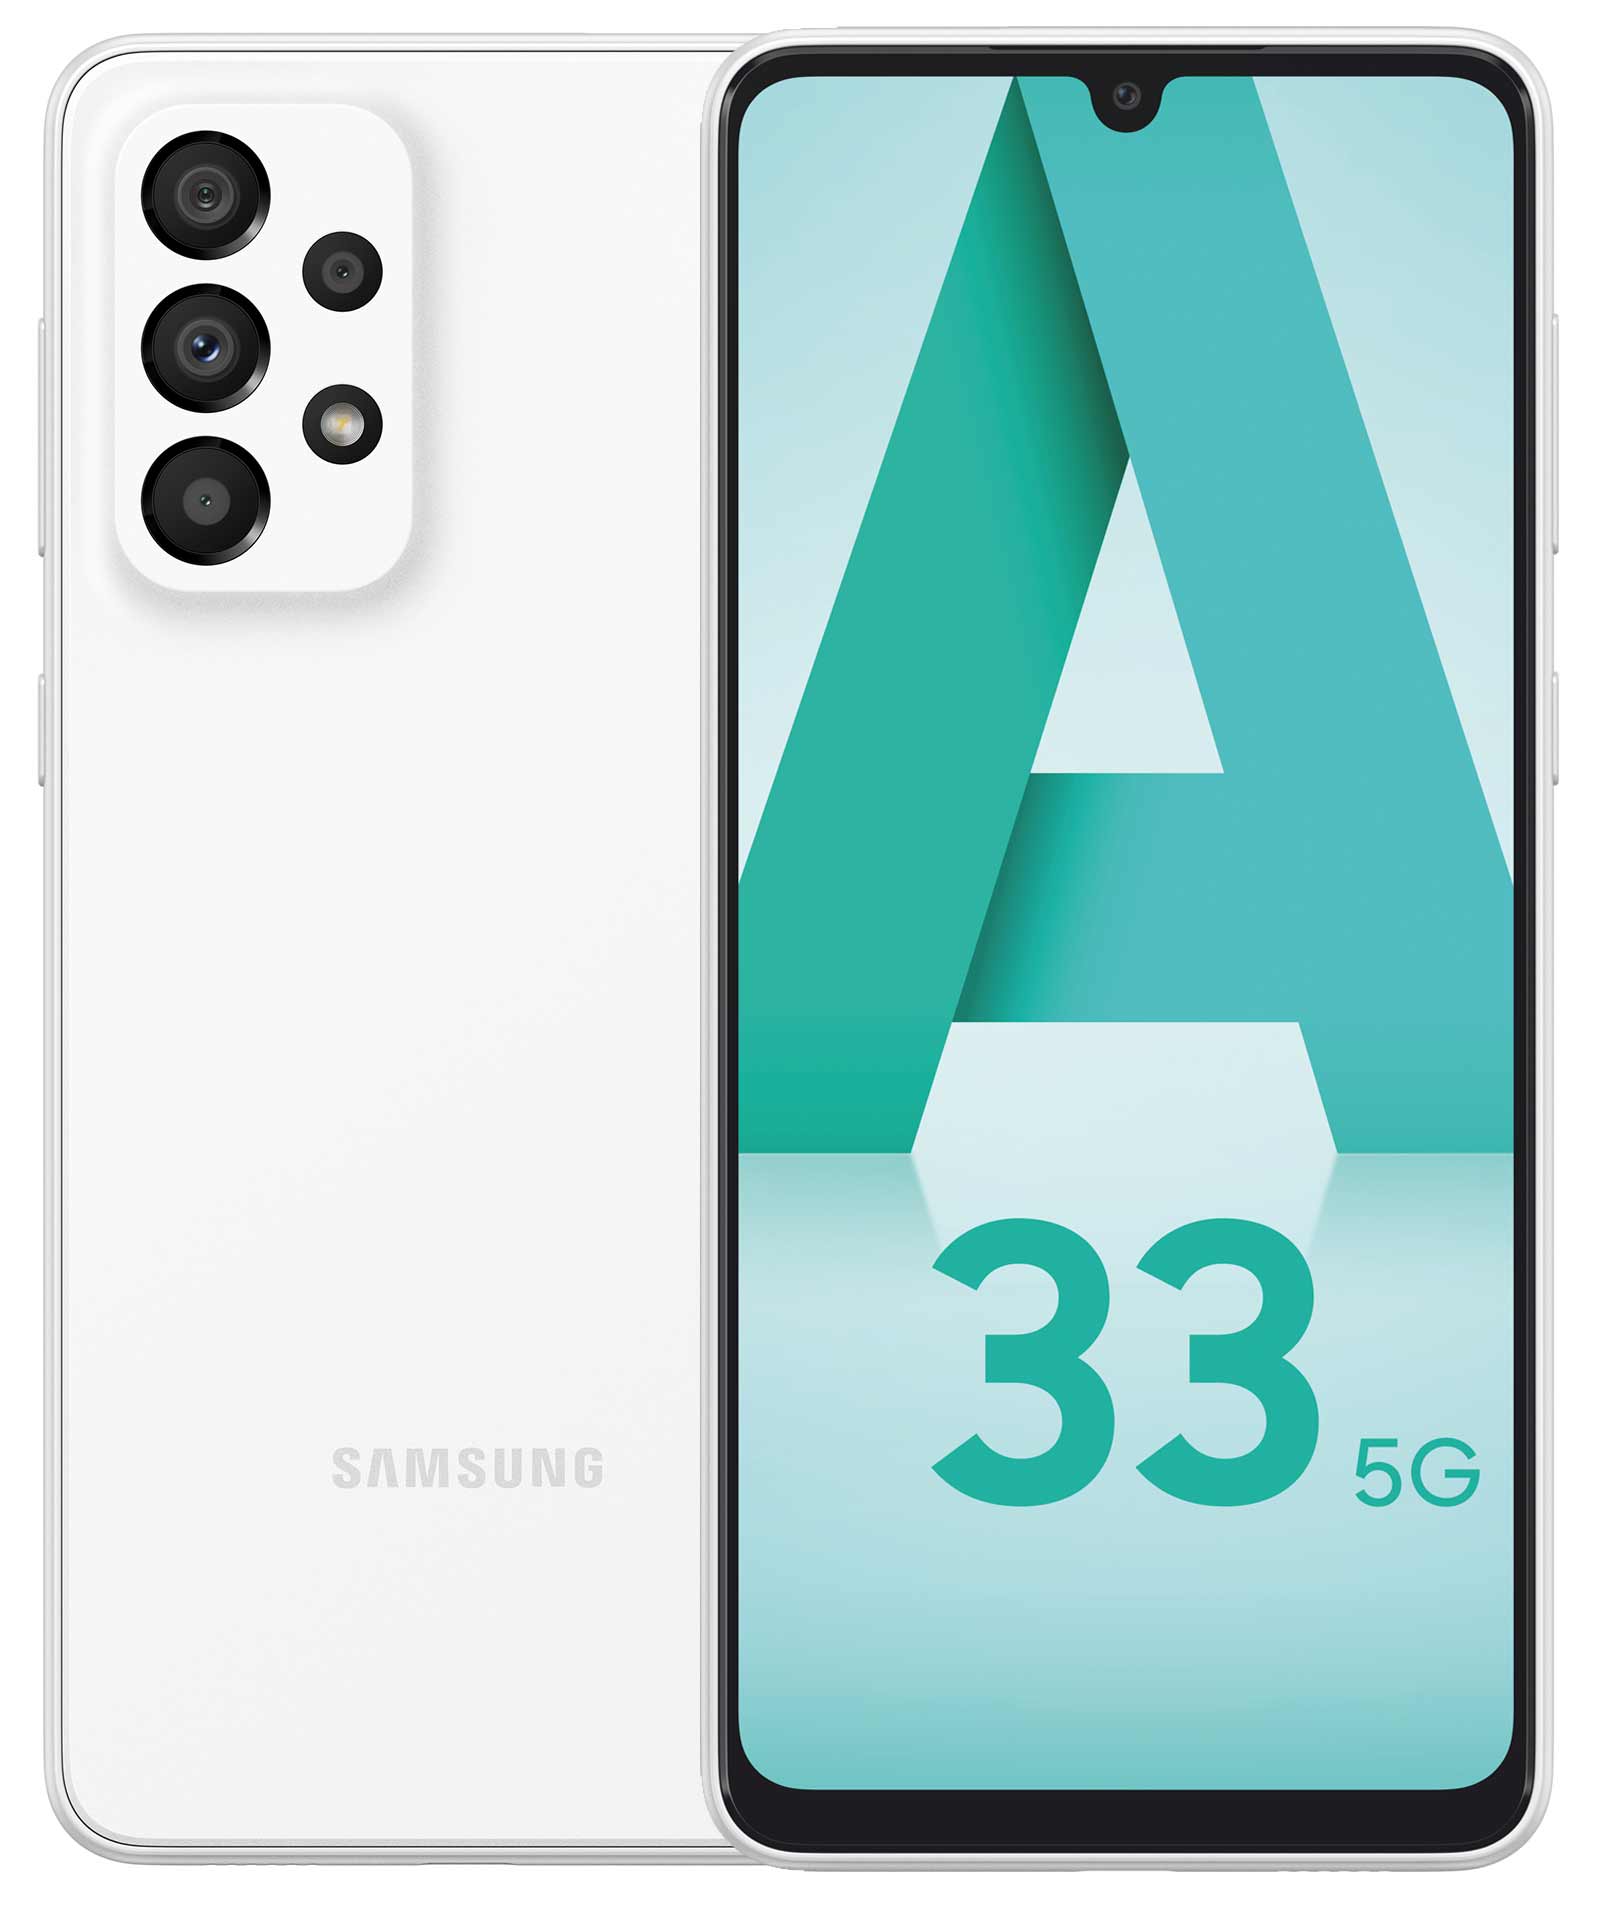 Galaxy A33 5G leaks in full two days ahead of launch - SamMobile